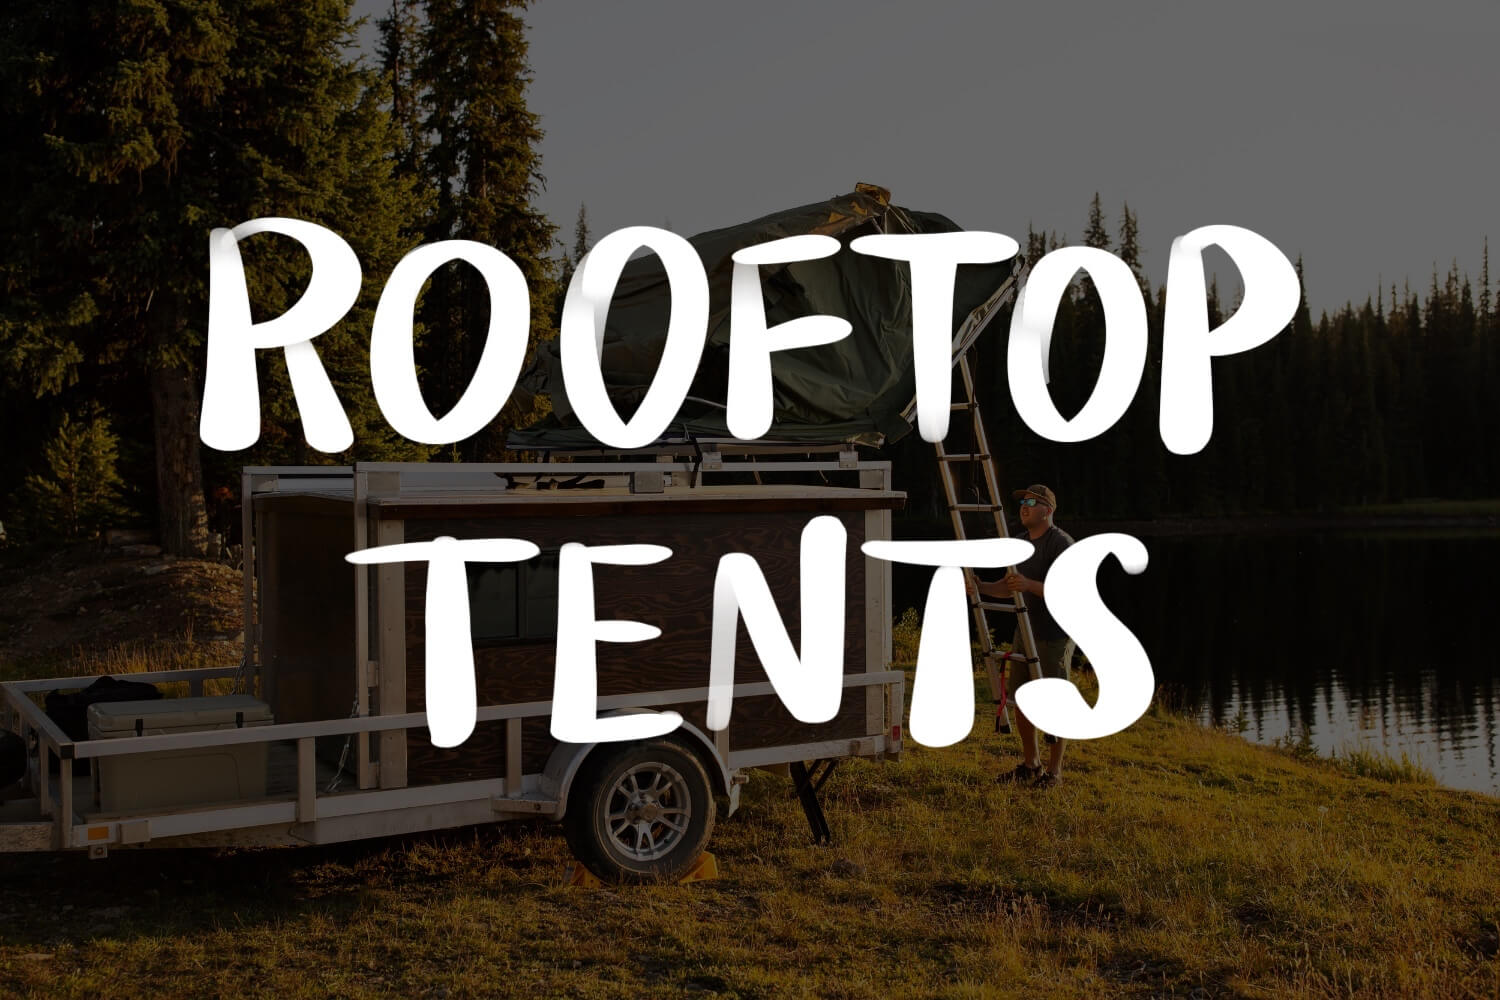 Read our in-depth reviews of best-in-class rooftop tents and take your camping to the next level!